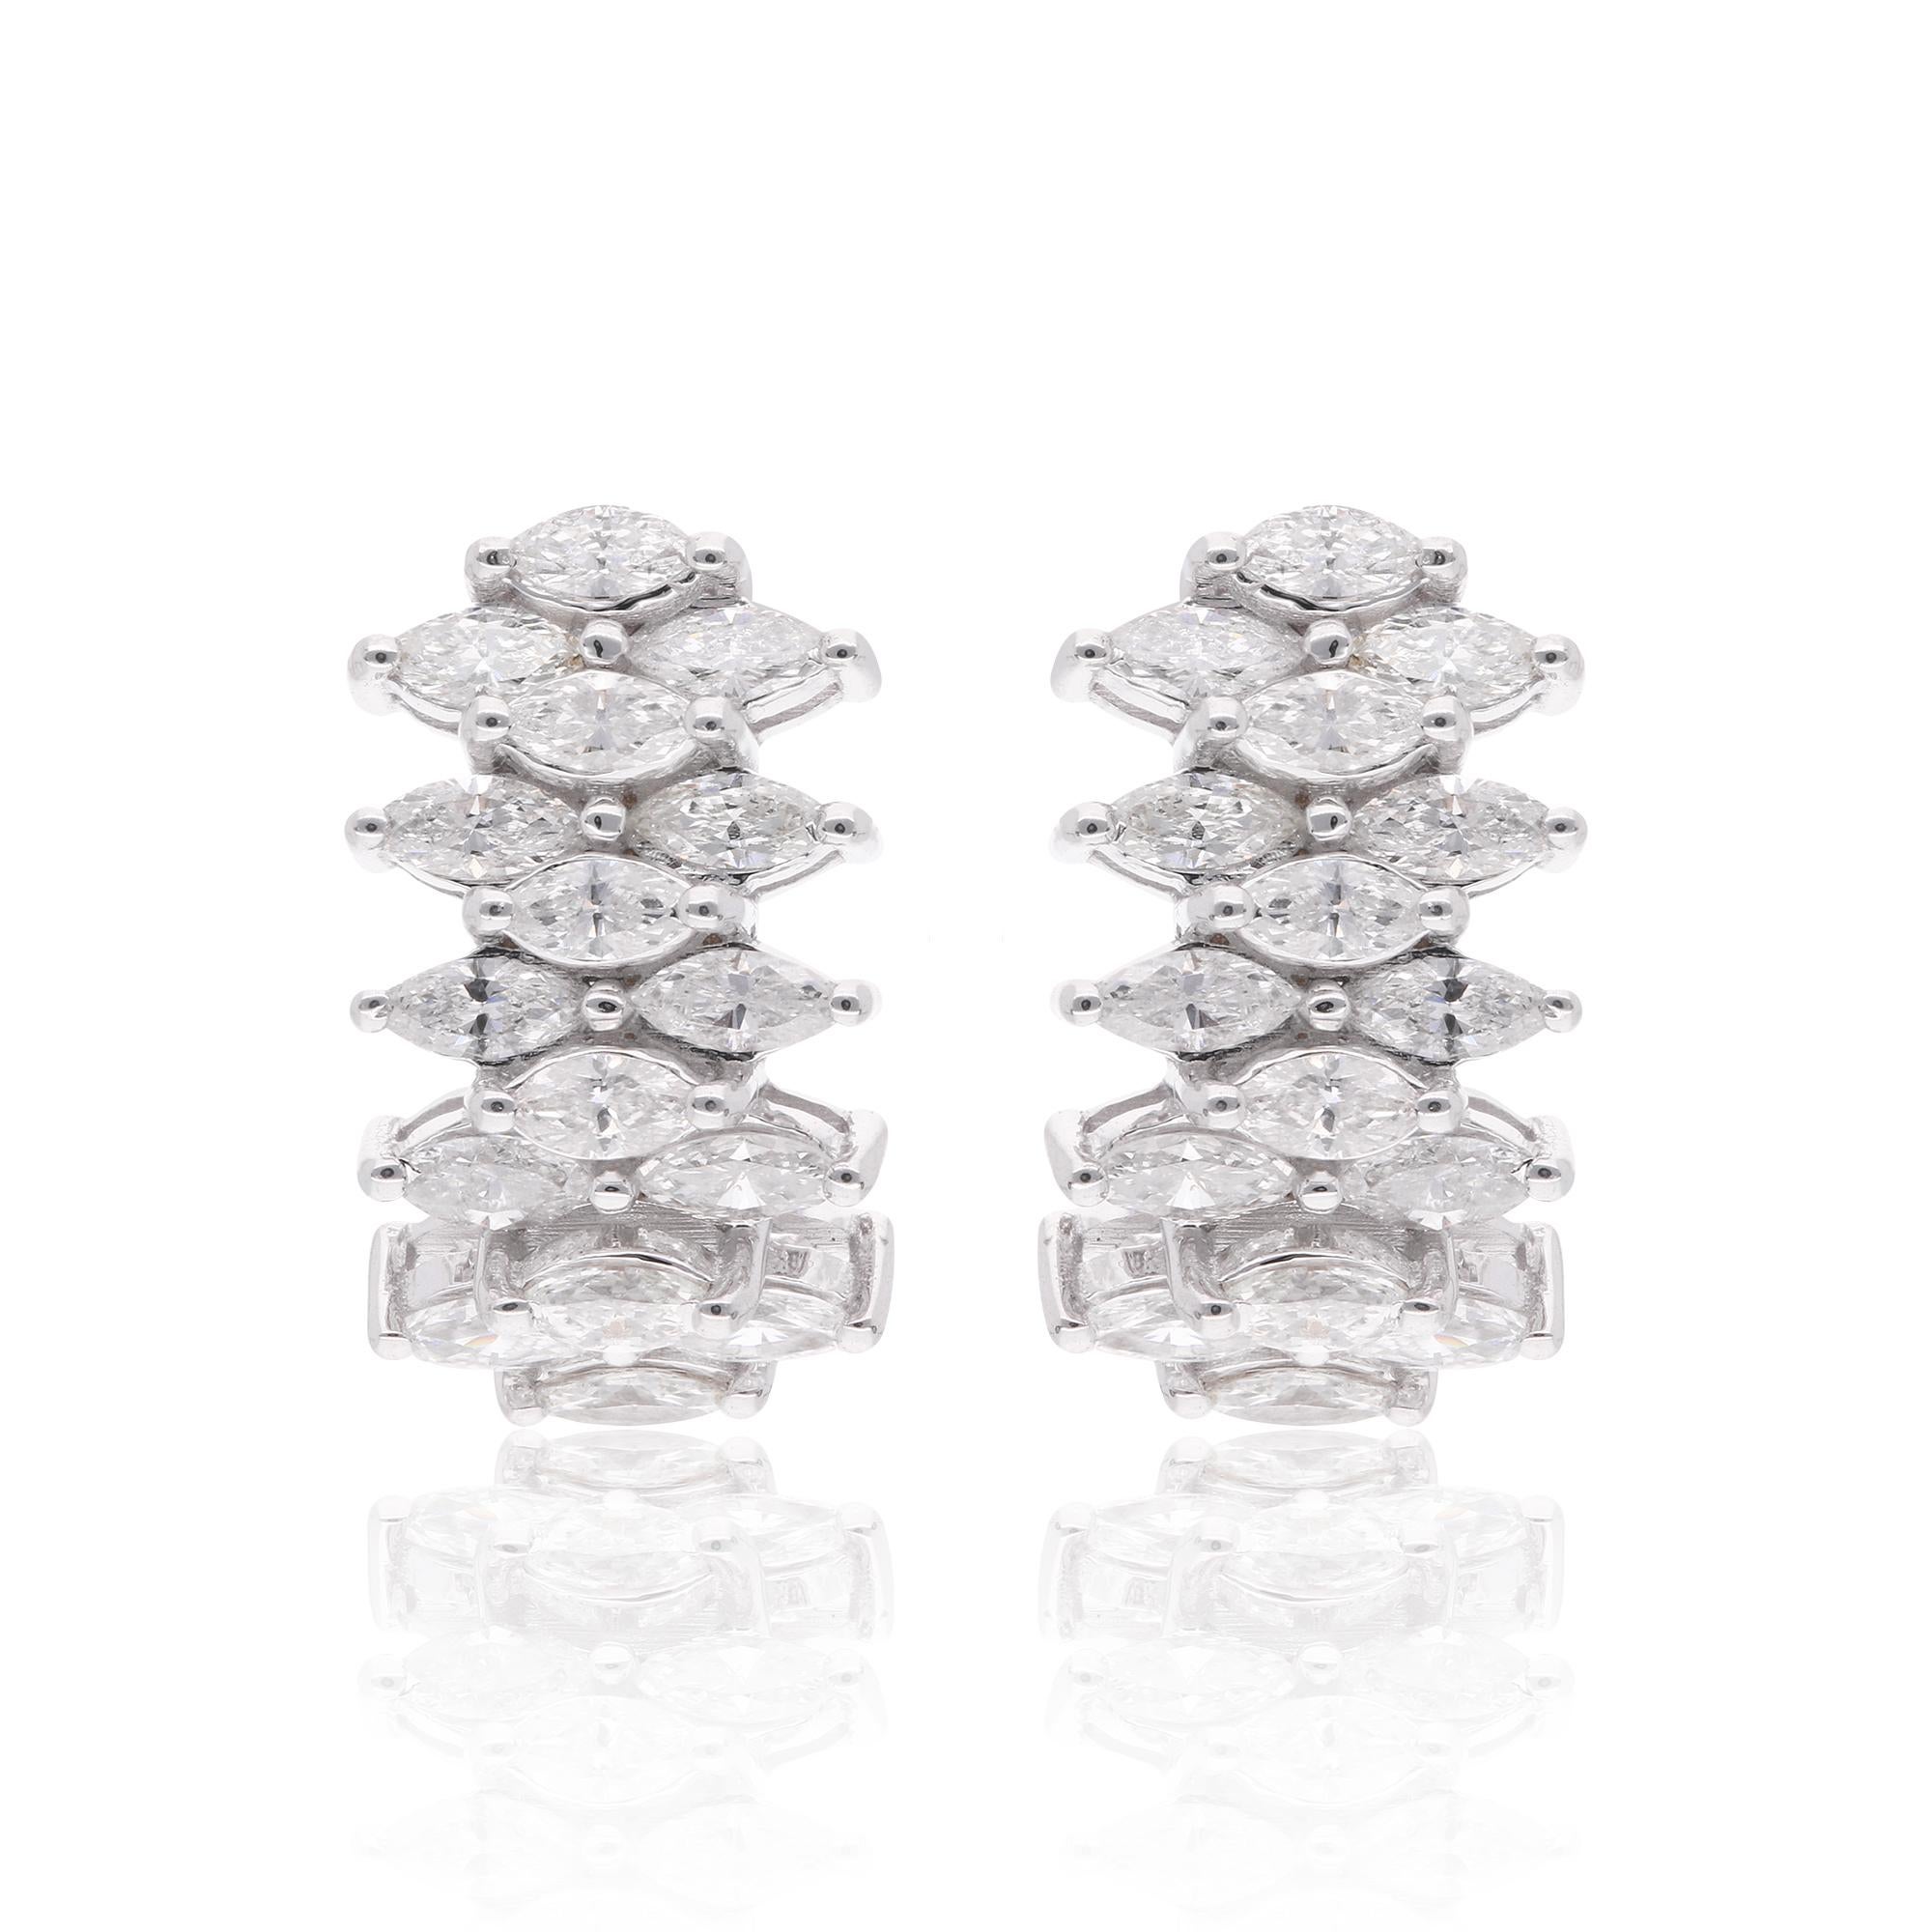 Complete your look for a glamorous evening in this gorgeous White Gold Earrings studded with Diamond. This will go well with all of your dresses and are attention seeking.

✧✧Welcome To Our Shop Spectrum Jewels India✧✧

